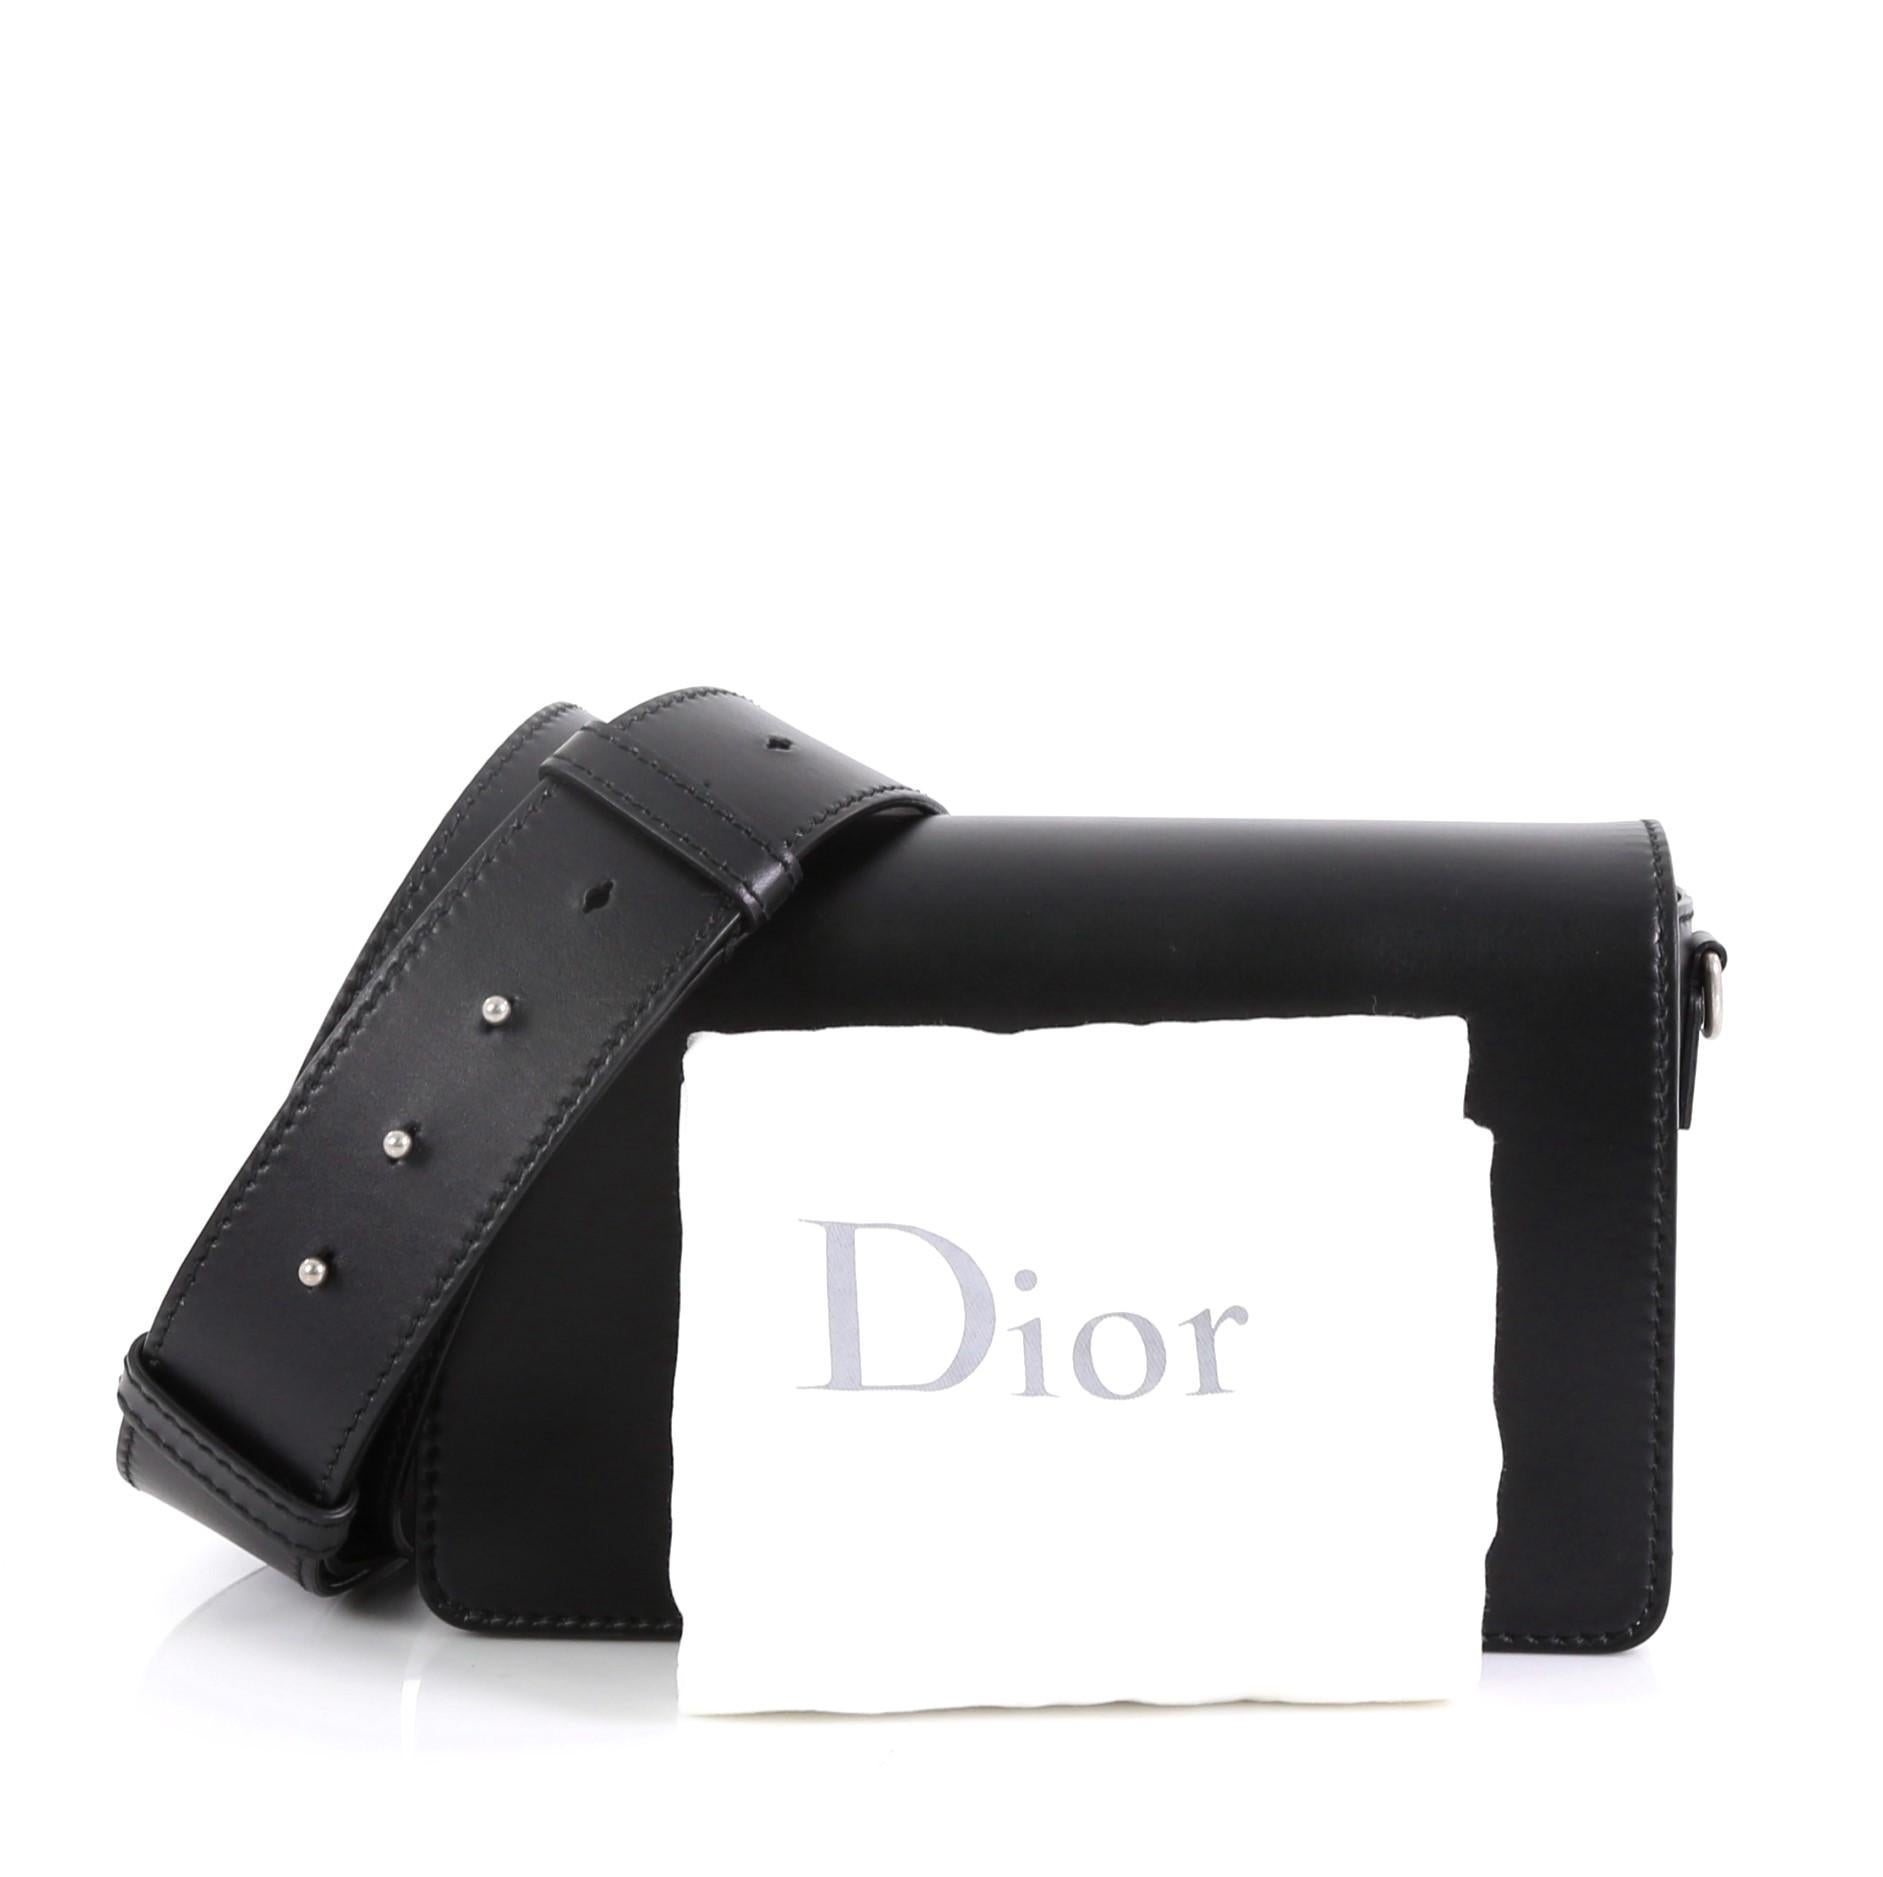 This Christian Dior Dio(r)evolution Flap Bag Leather Medium, crafted from black leather, features a slot handclasp with DIOR emblem and silver-tone hardware. It opens to a black suede interior with zip pocket. 

Estimated Retail Price: